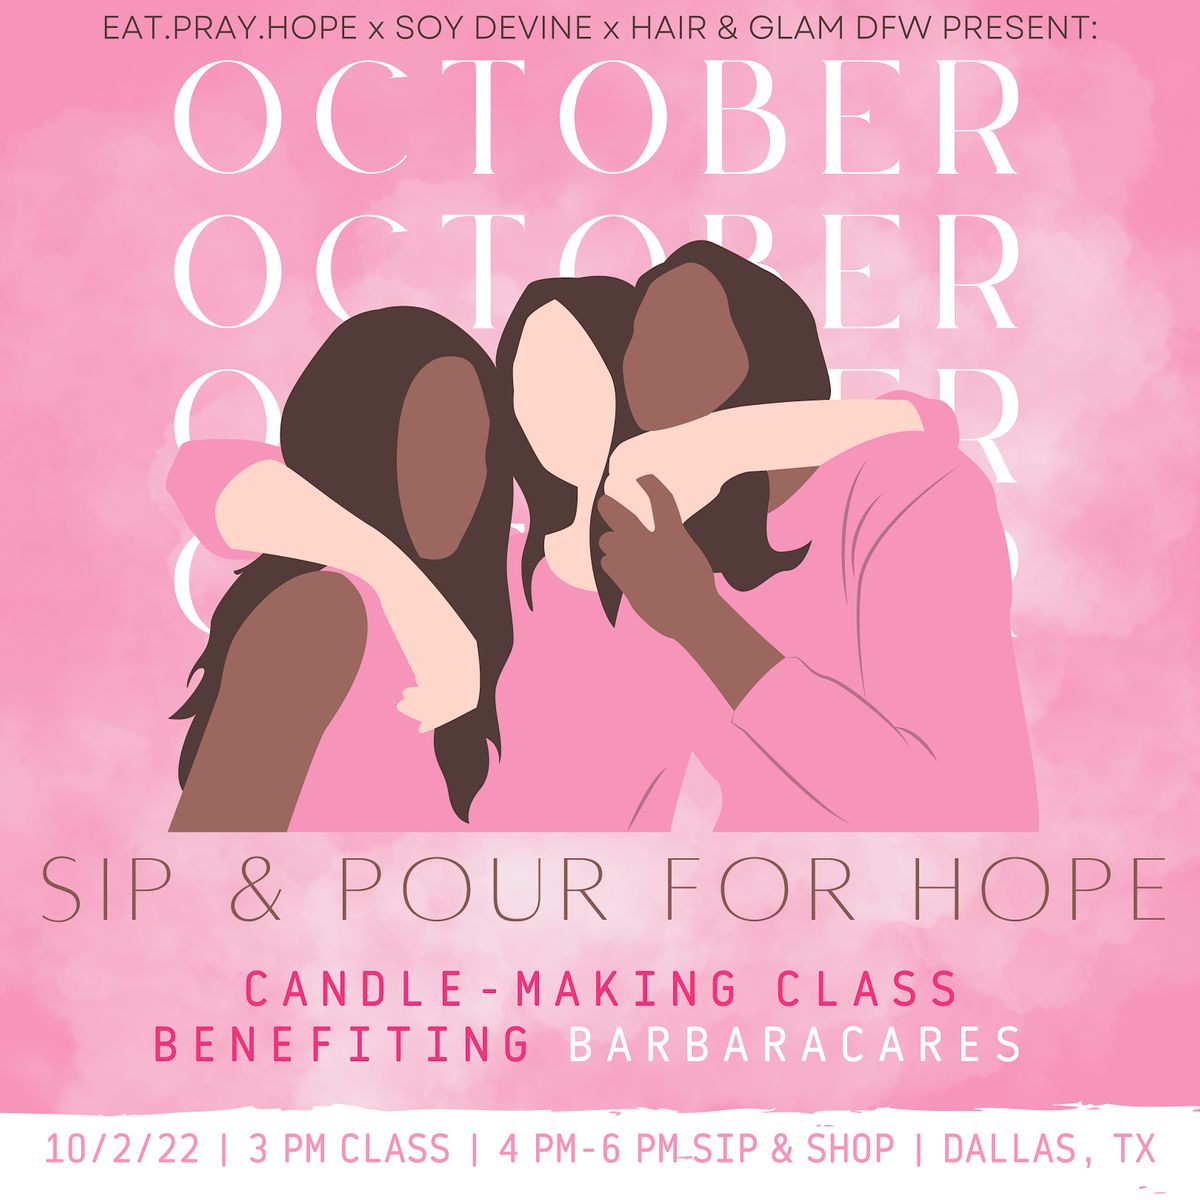 Sip and Pour for Hope: Candle-Making Class